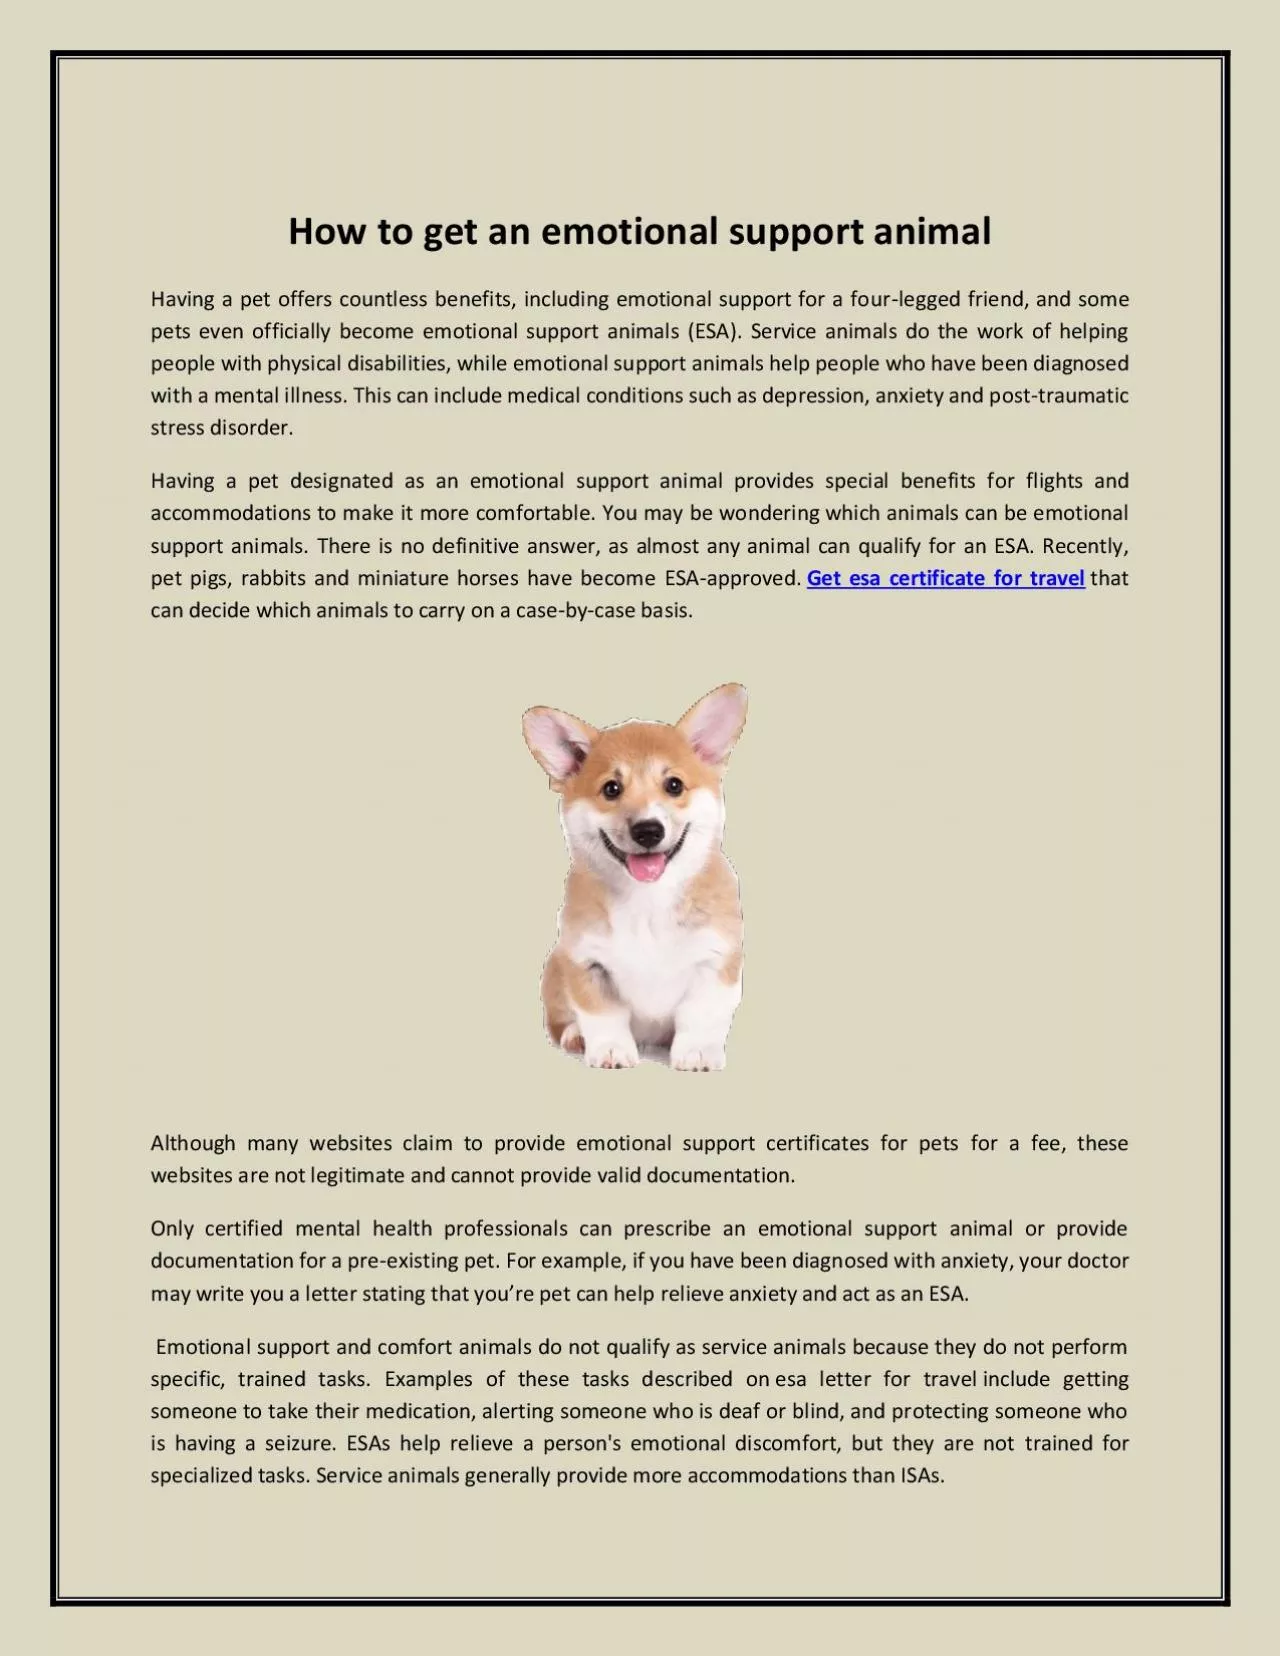 How to get an emotional support animal